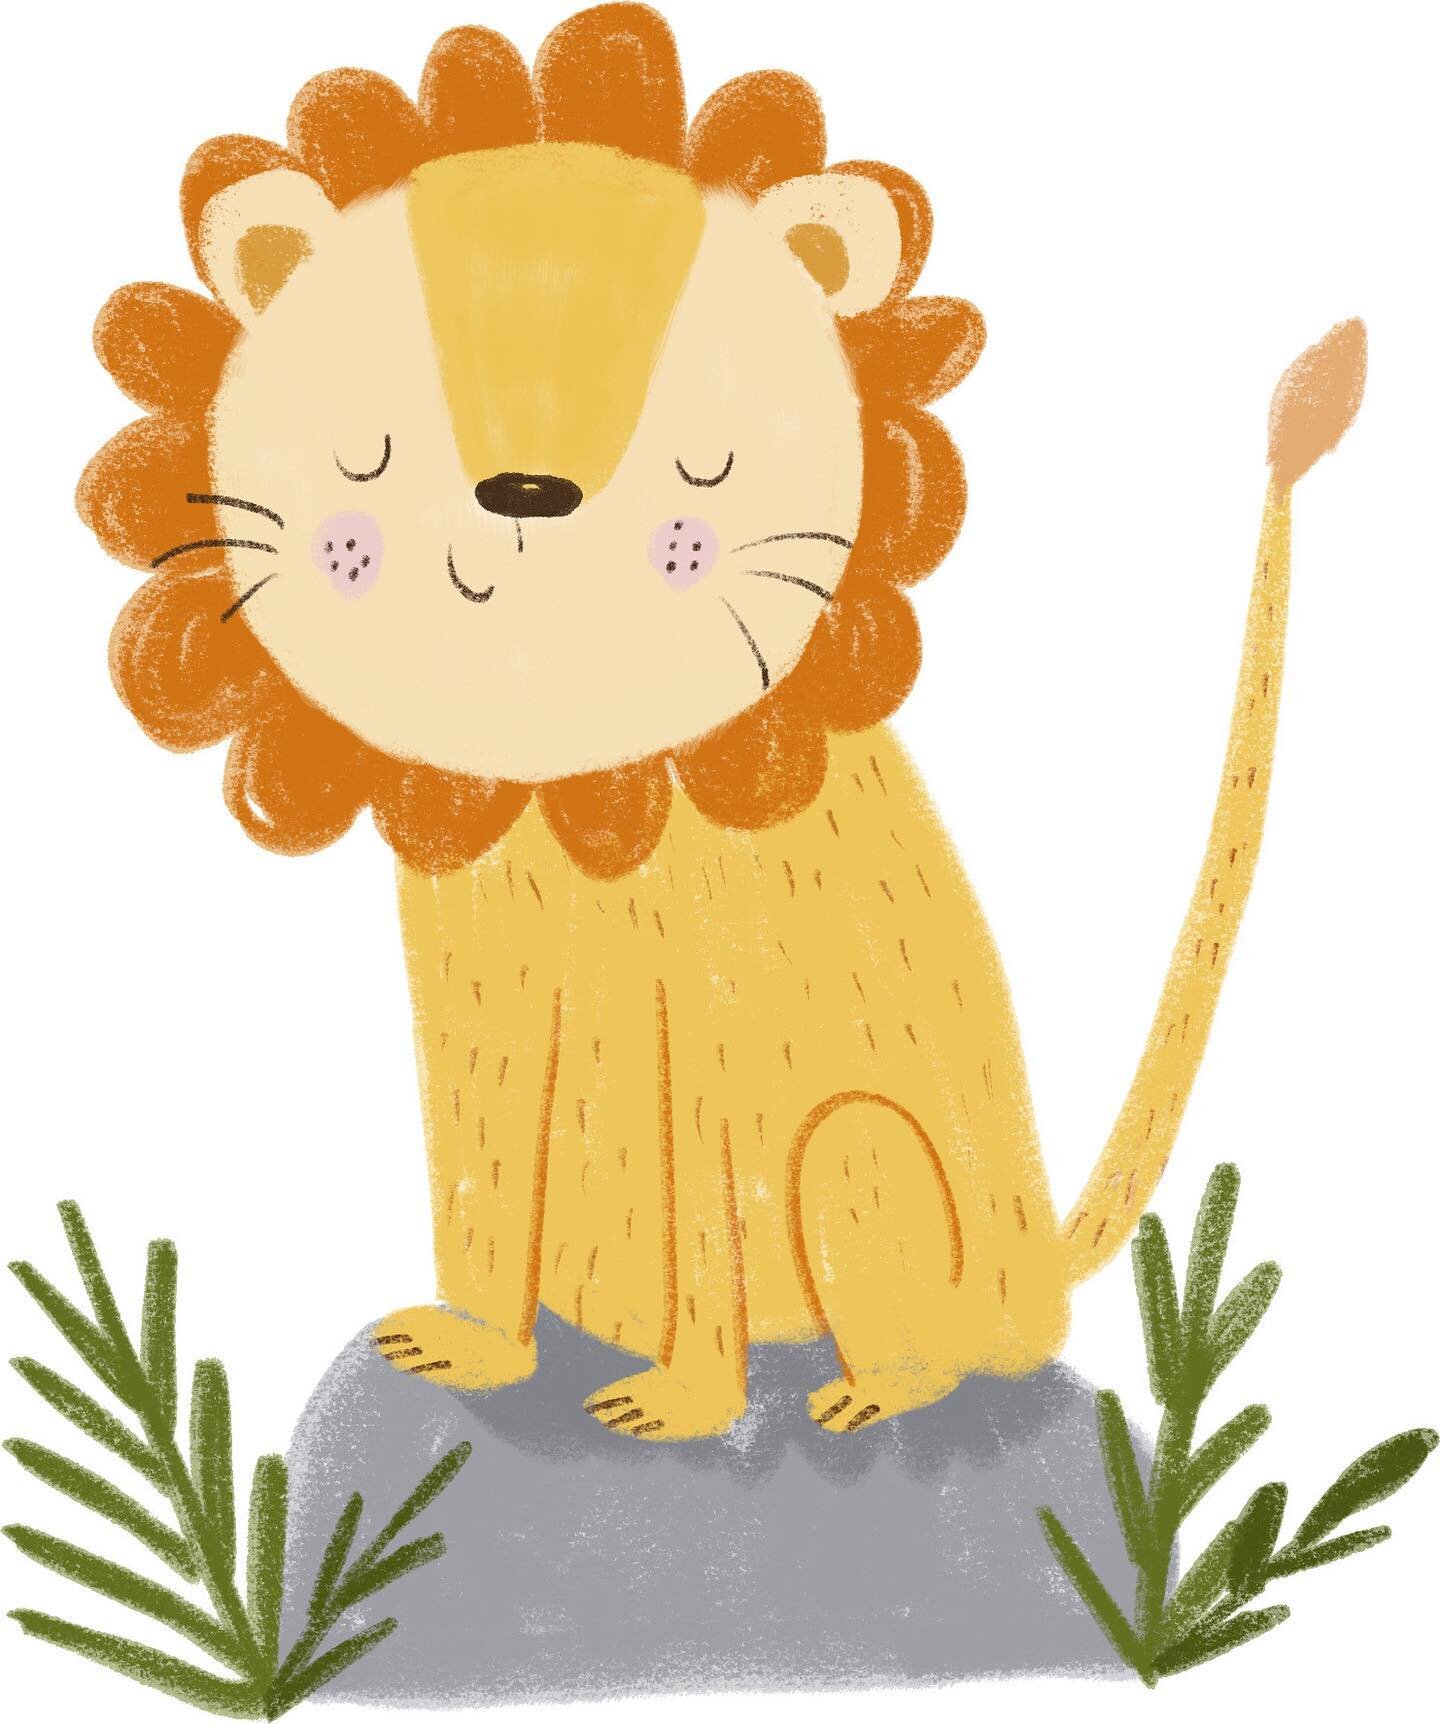 Meet Liam the Lively Lion - the spirited lion and reigning monarch of Queebi Land, who has forged his unyielding confidence and command by confronting and surmounting countless challenges throughout his life

#queebi #queebibaby #babycute #babylion #